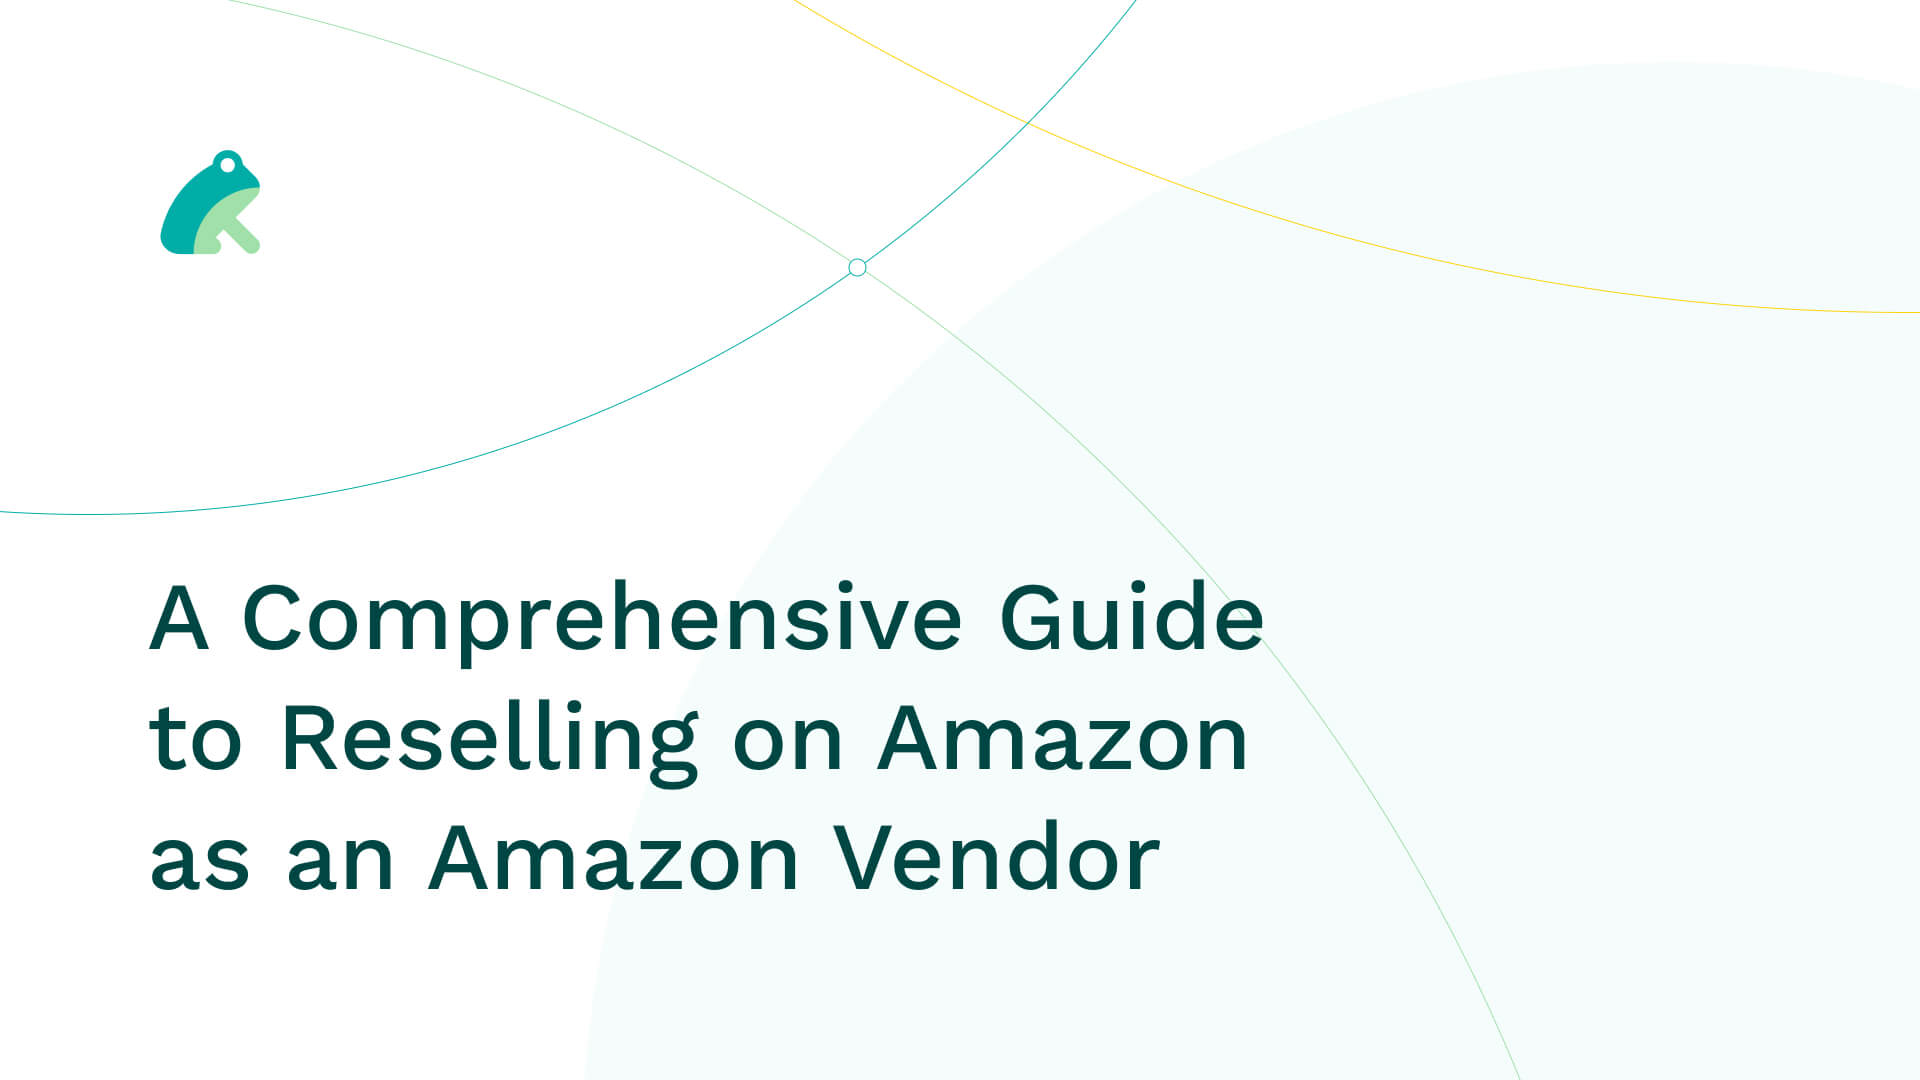 A Comprehensive Guide to Reselling on Amazon as an Amazon Vendor